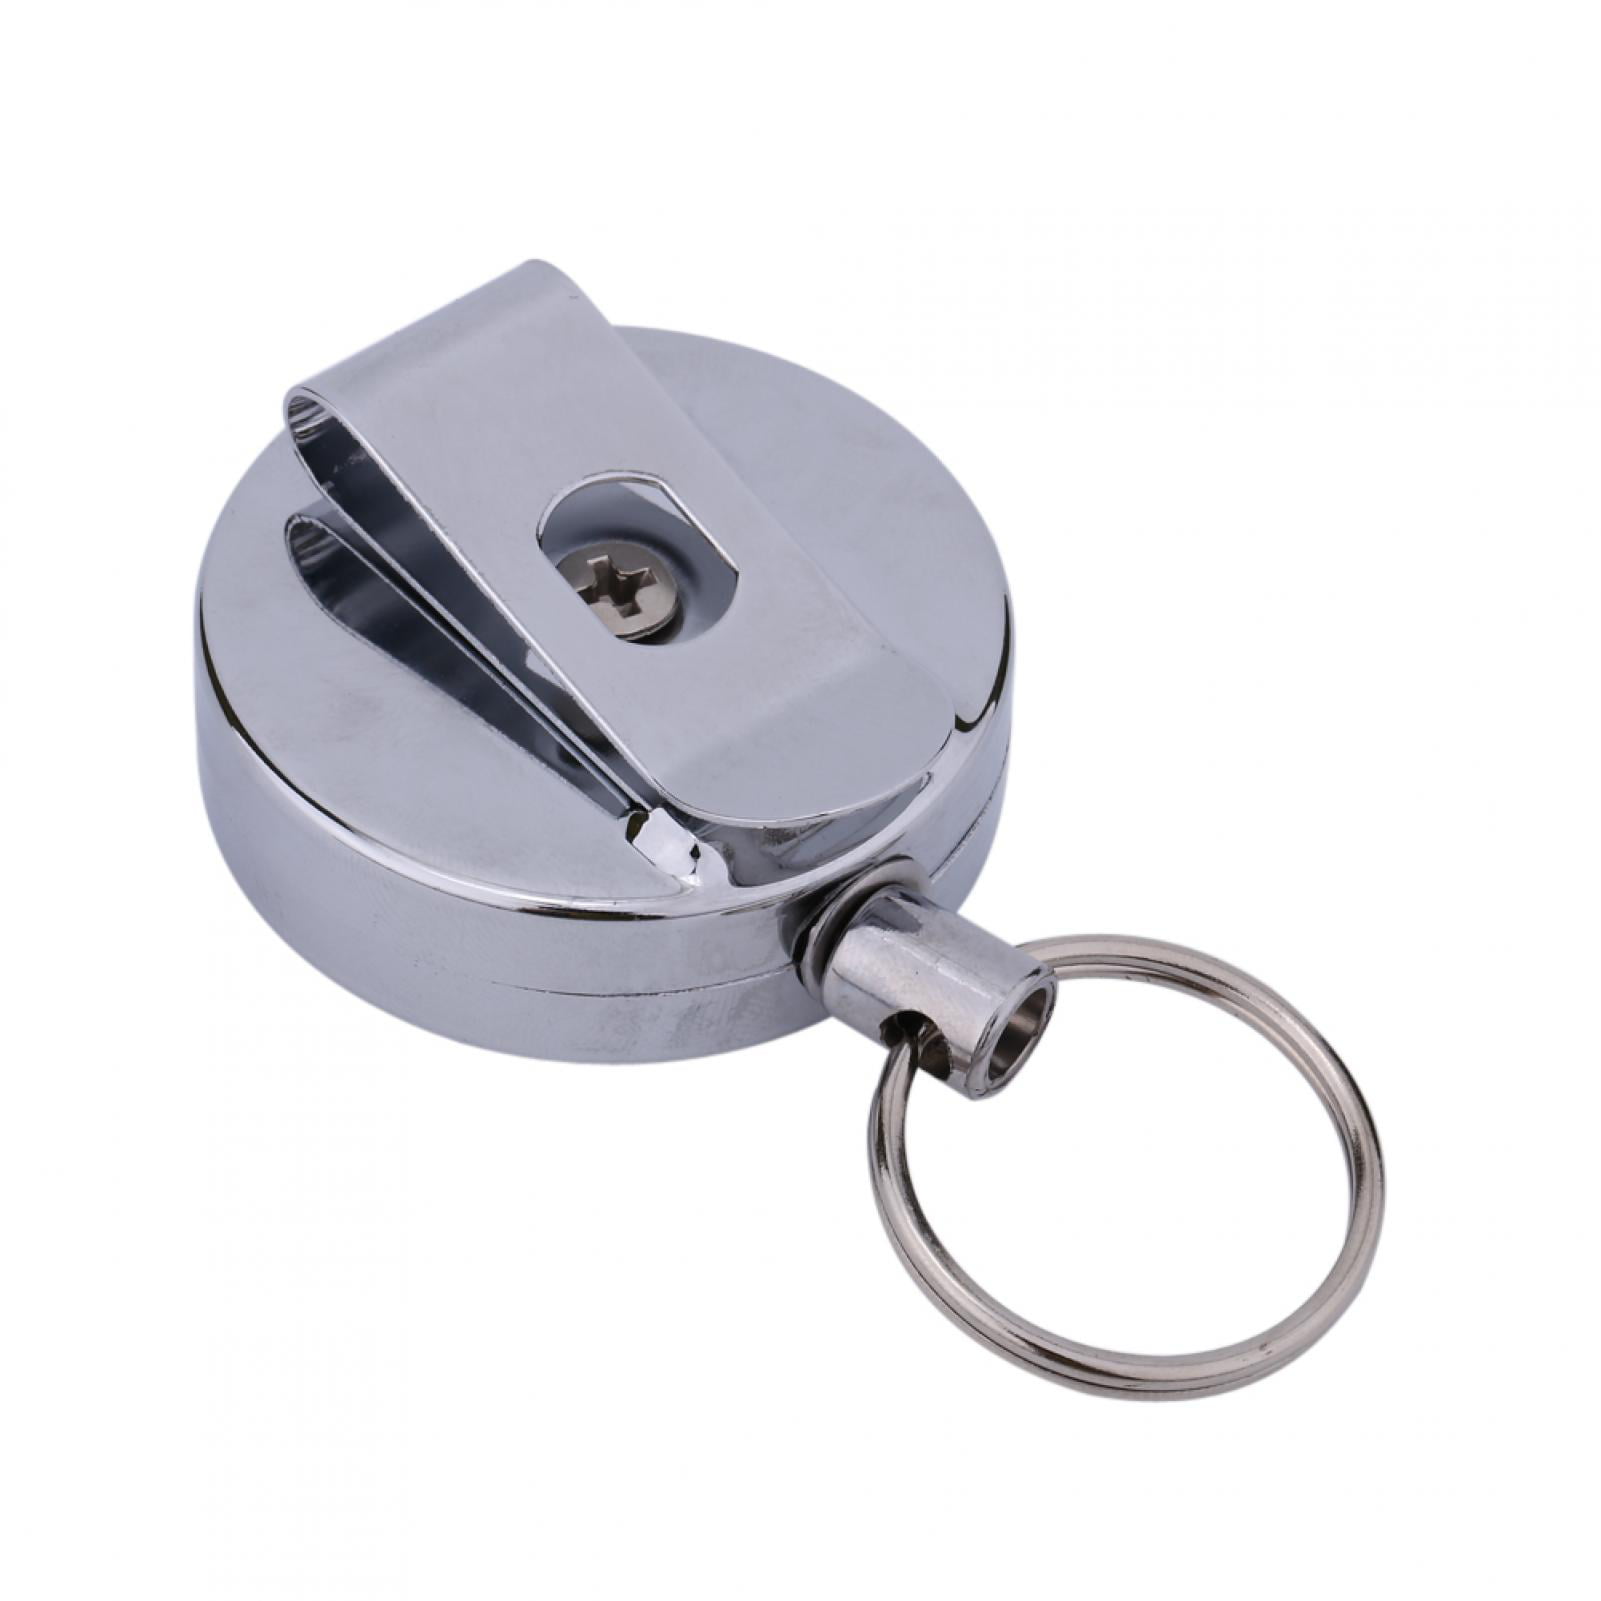 Details about   Heavy Duty Retractable Key Reel  Recoil Cord Key Ring Pull Chain Belt Clip  WH 